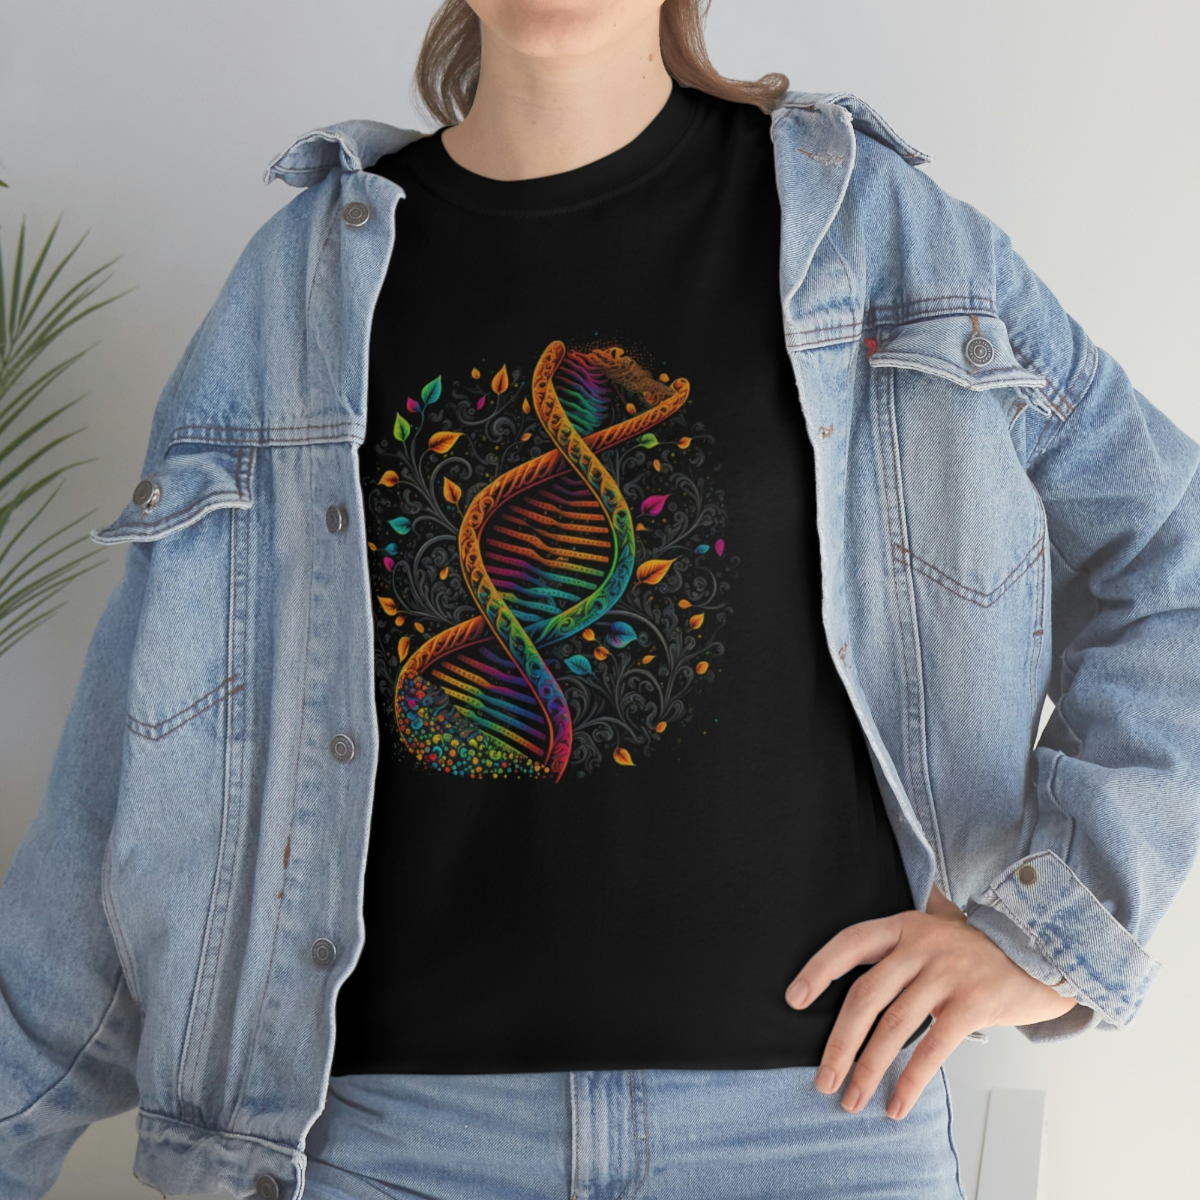 Trippy Shirts Graphic Tees: DNA Strands Short Sleeve T shirt